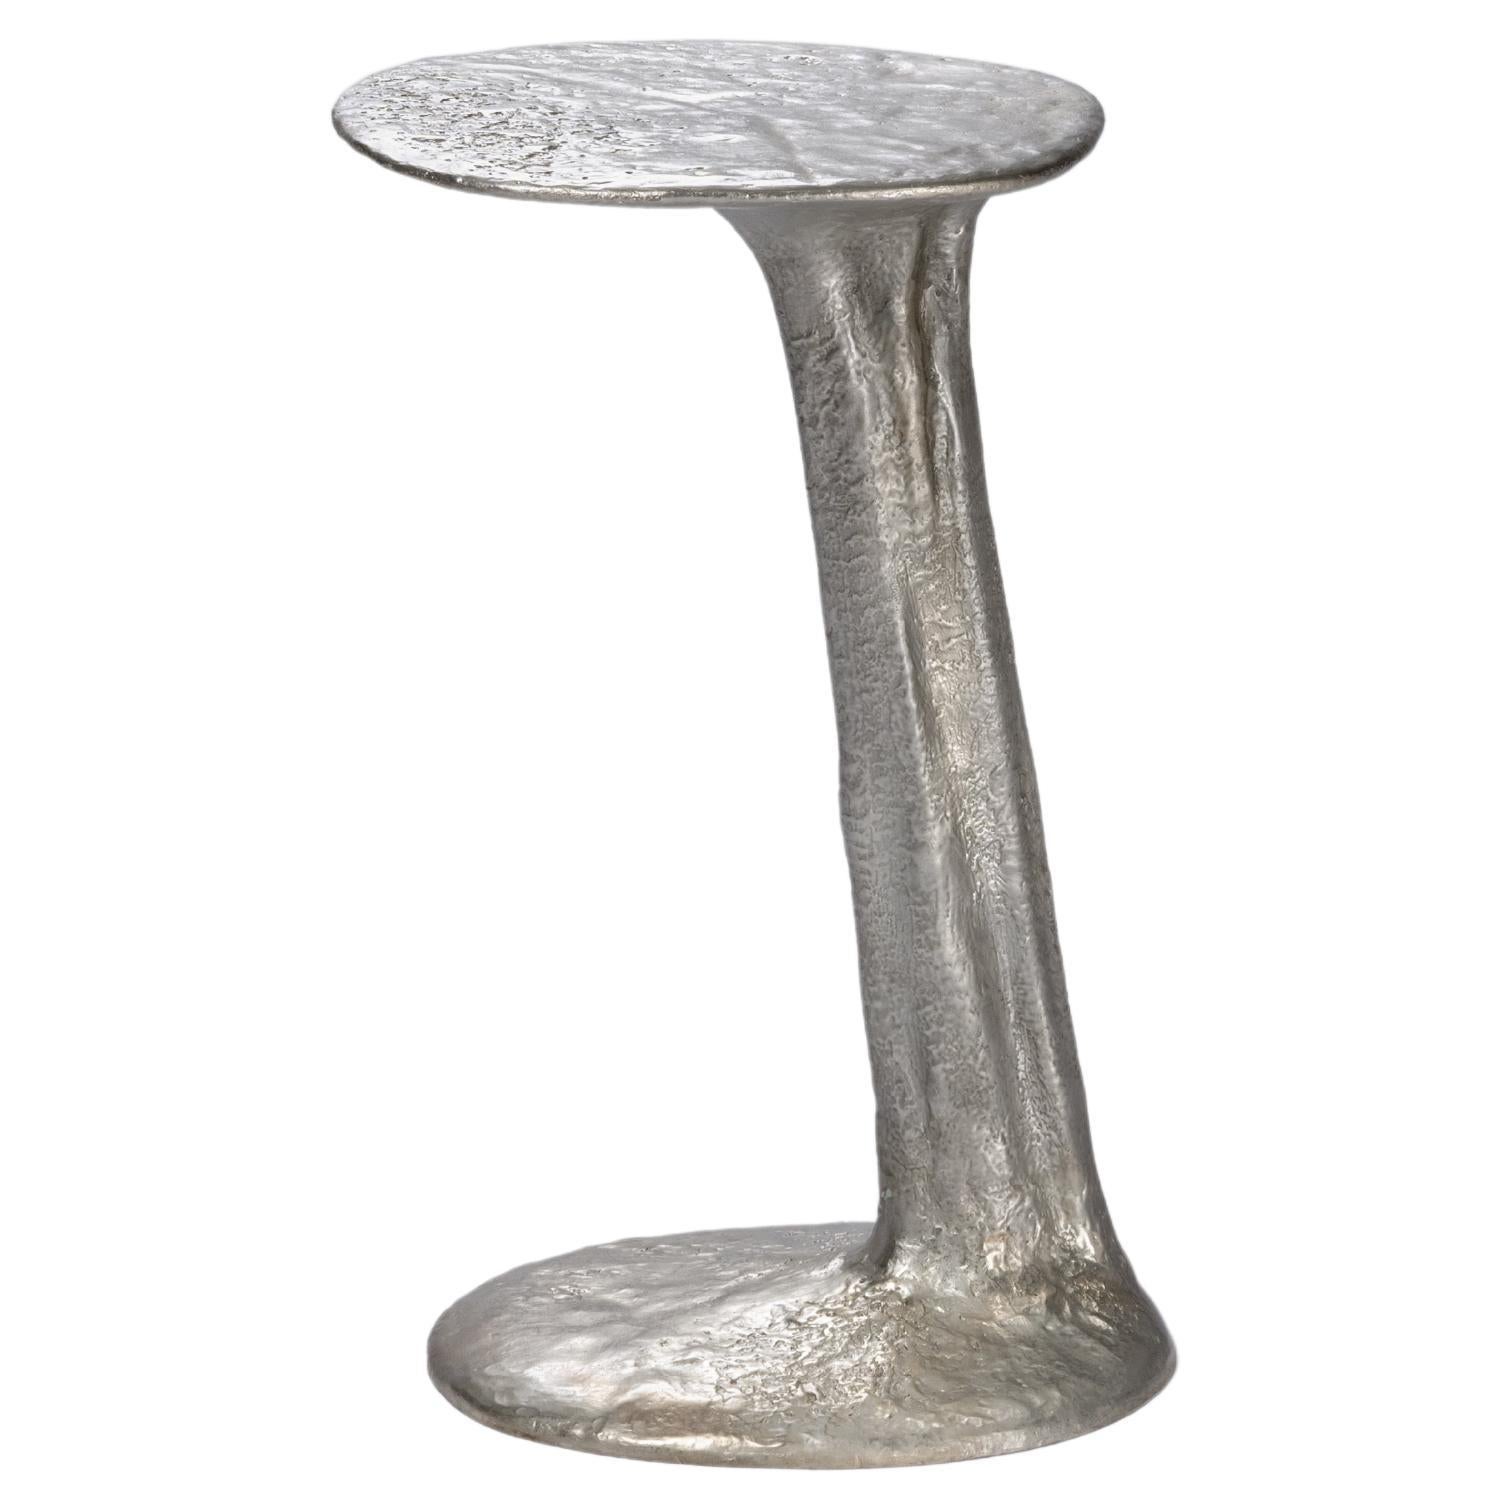 Contemporary Cast Brass Silver The Crack in Chaos Side Table S by Atelier V&F